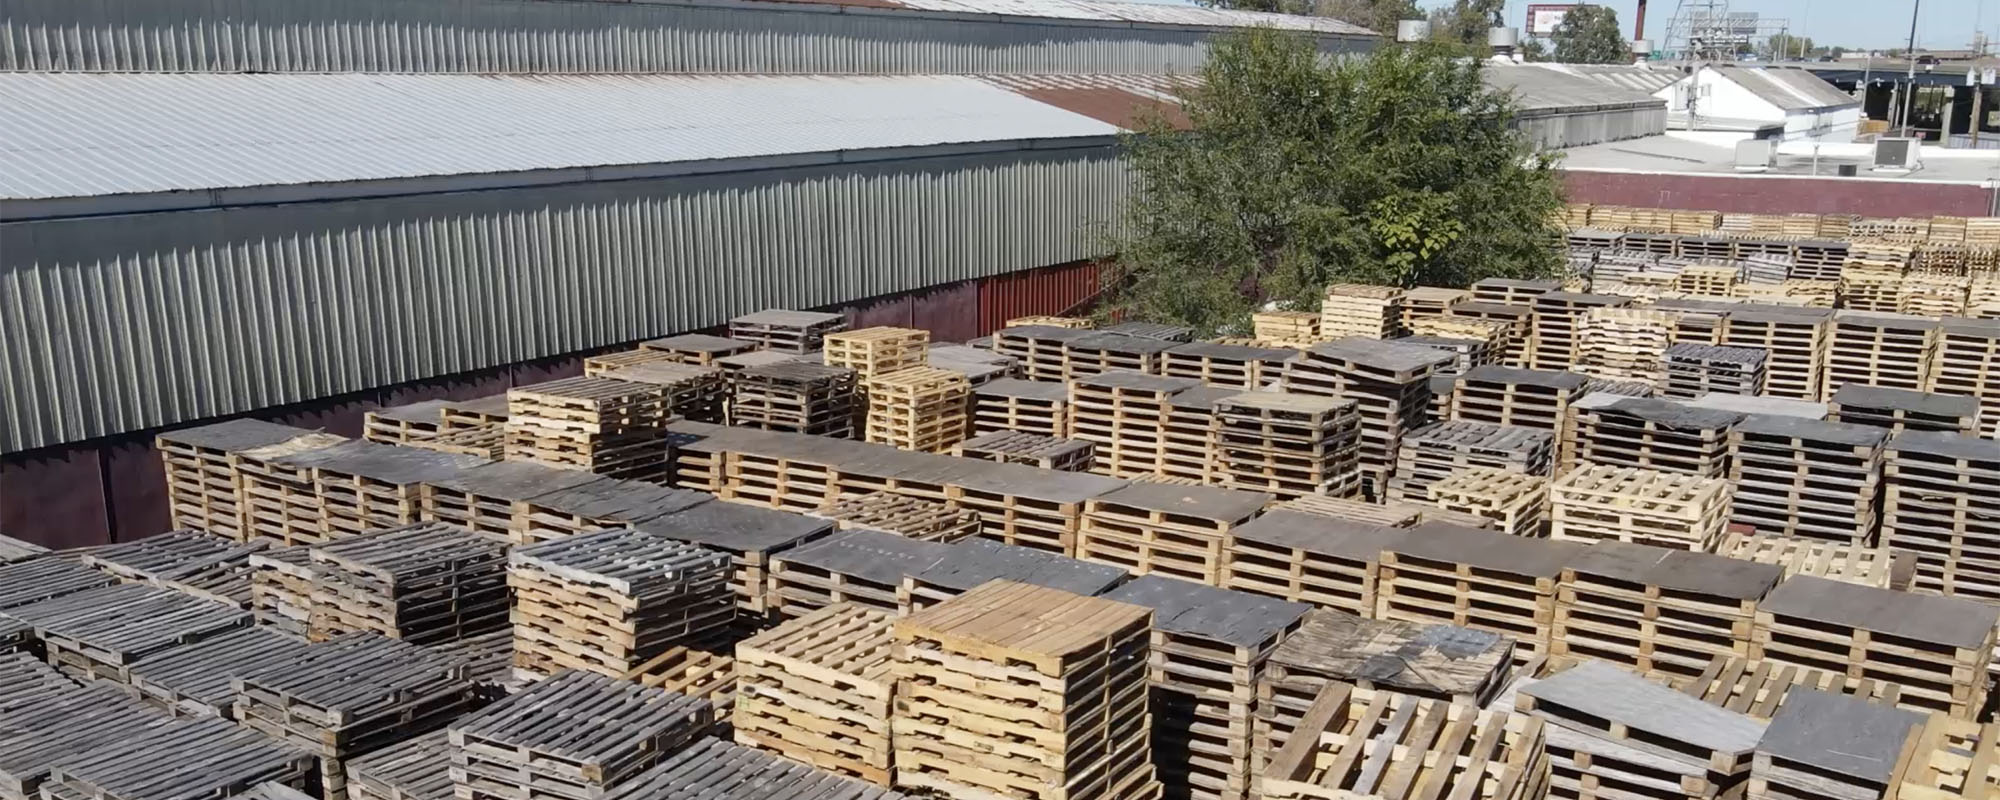 Pallet Sales and Recycling